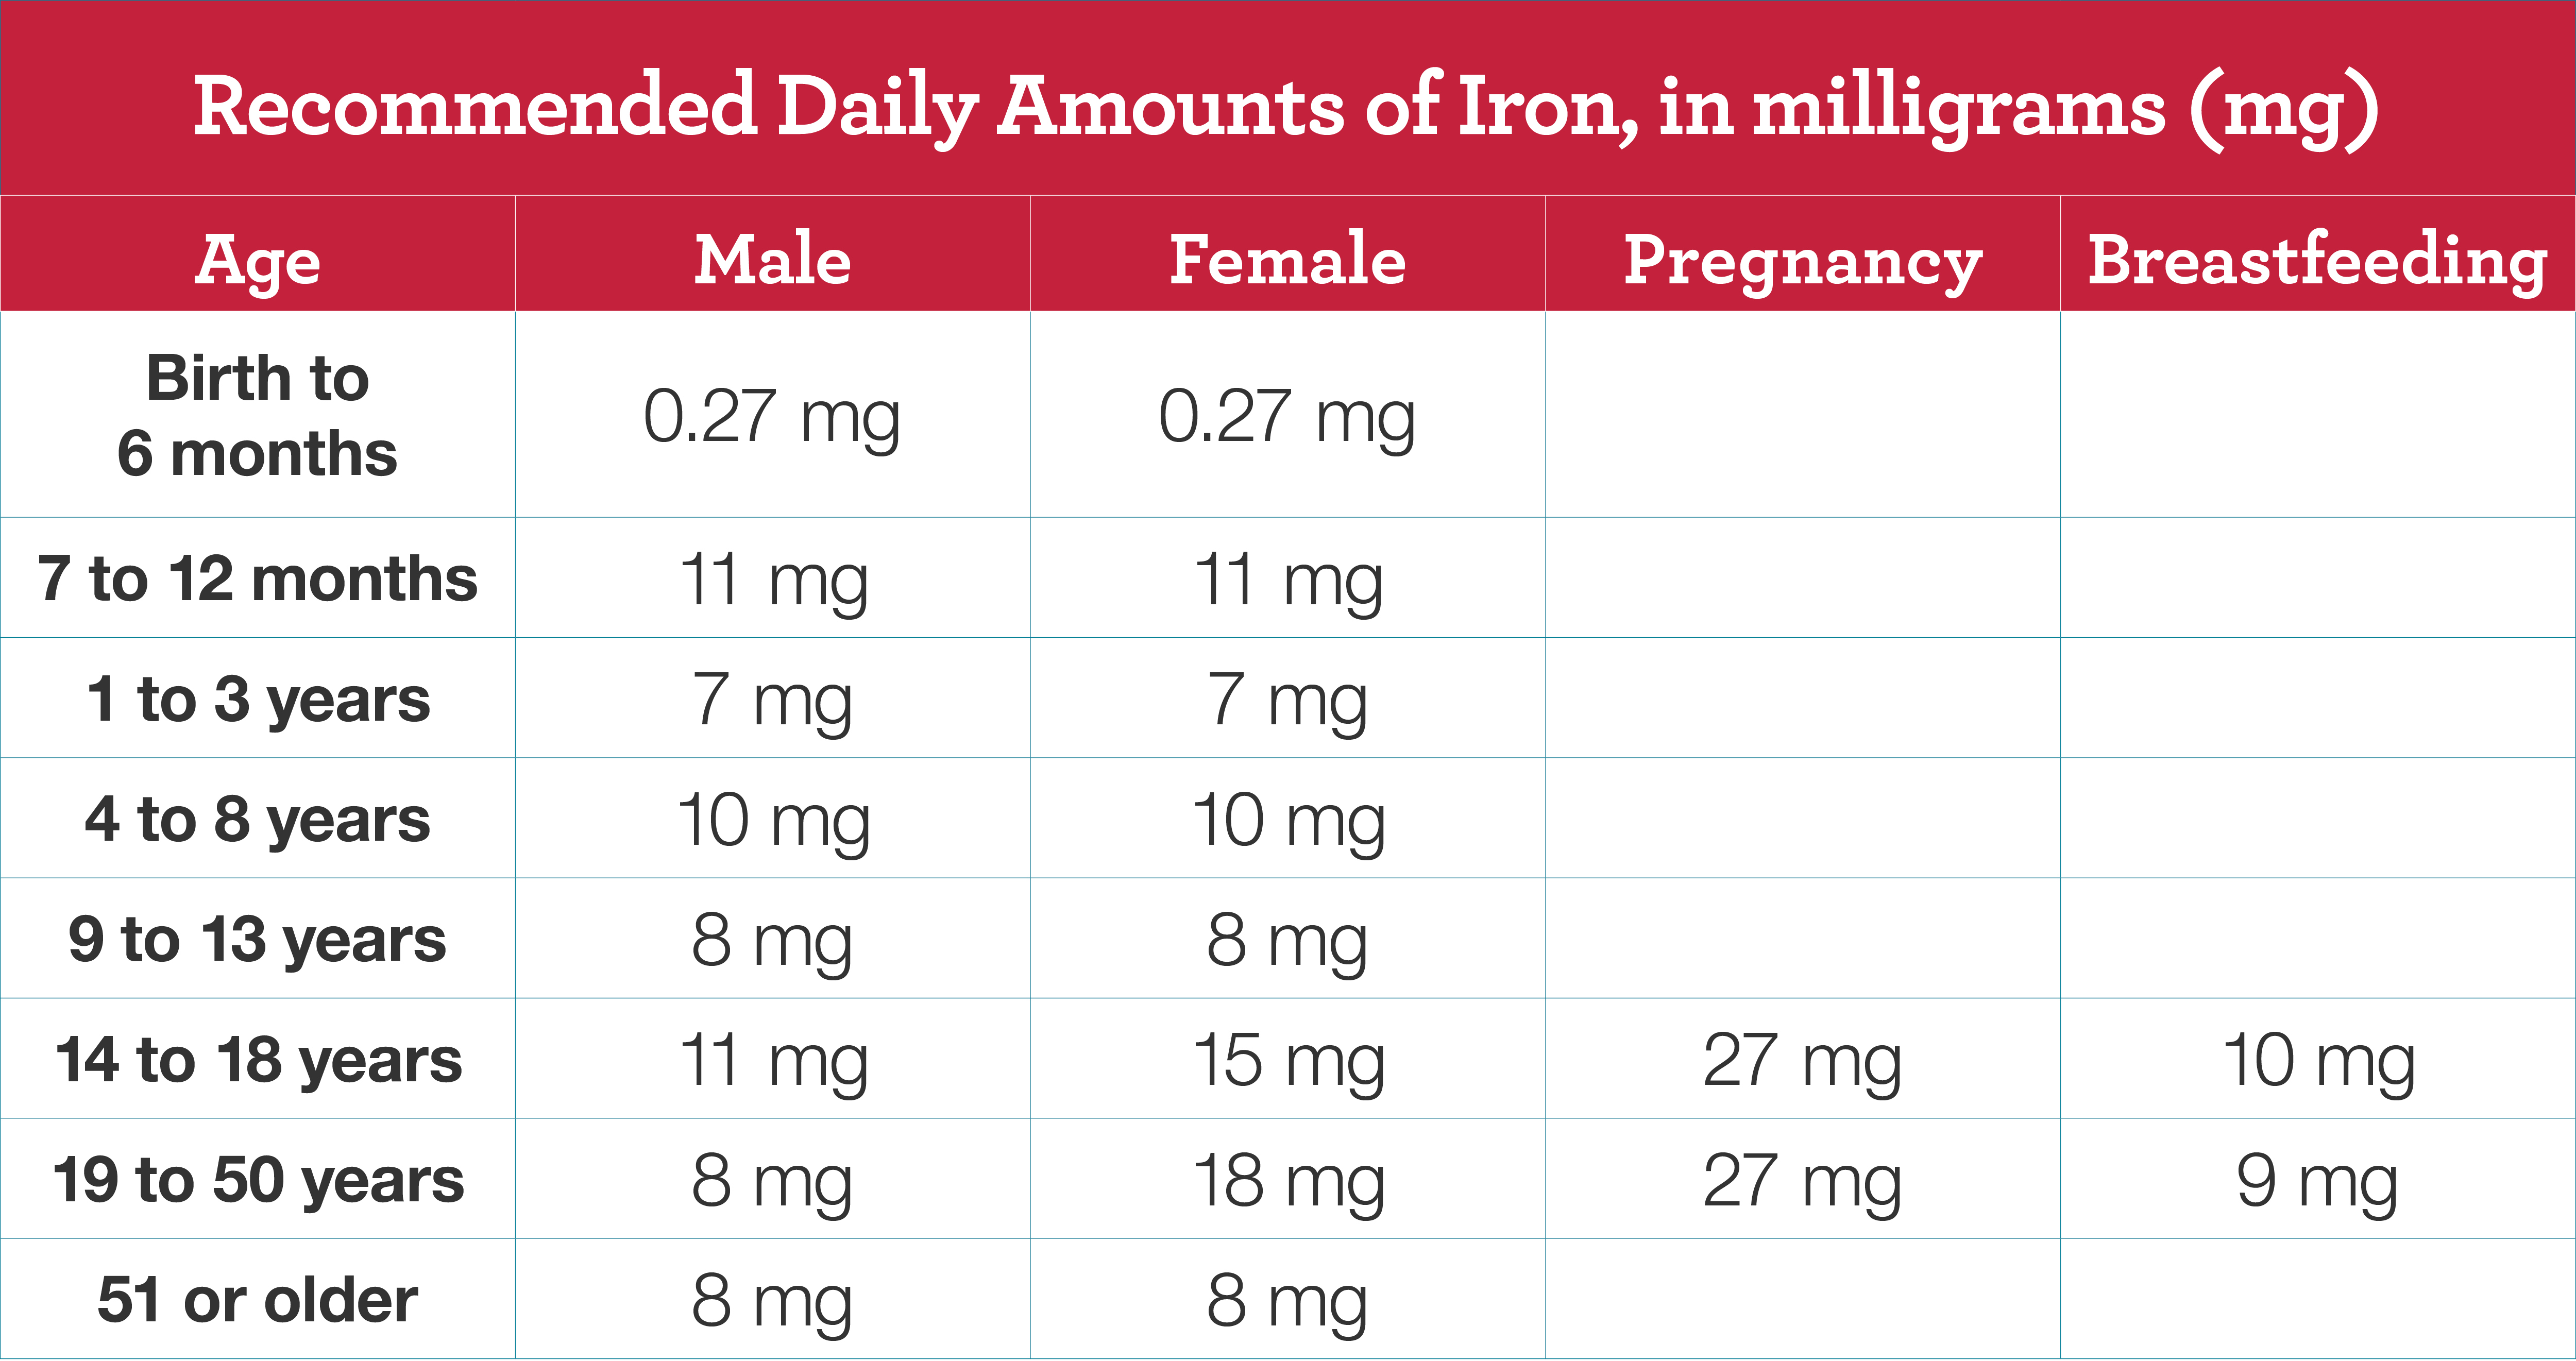 Recommended daily iron intake for children and adults. The table lists the recommended amounts of iron, in milligrams (mg) at different ages and stages of life. Until the teen years, the recommended amount of iron is the same for boys and girls. From birth to 6 months, babies need 0.27 mg of iron. This number goes up to 11 mg for children ages 7 to 12 months, and down to 7 mg for children ages 1 to 3. From ages 4 to 8, children need 10 mg, and from ages 9 to 13, 8 mg. From ages 14 to 18, boys need 11 mg, while girls need 15 mg. From ages 19 to 50, men need 8 mg and women need 18 mg. After age 51, both men and women need 8 mg. Pregnant women need 27 mg. Breastfeeding girls under age 18 need 10 mg while breastfeeding women older than 18 need 9 mg.